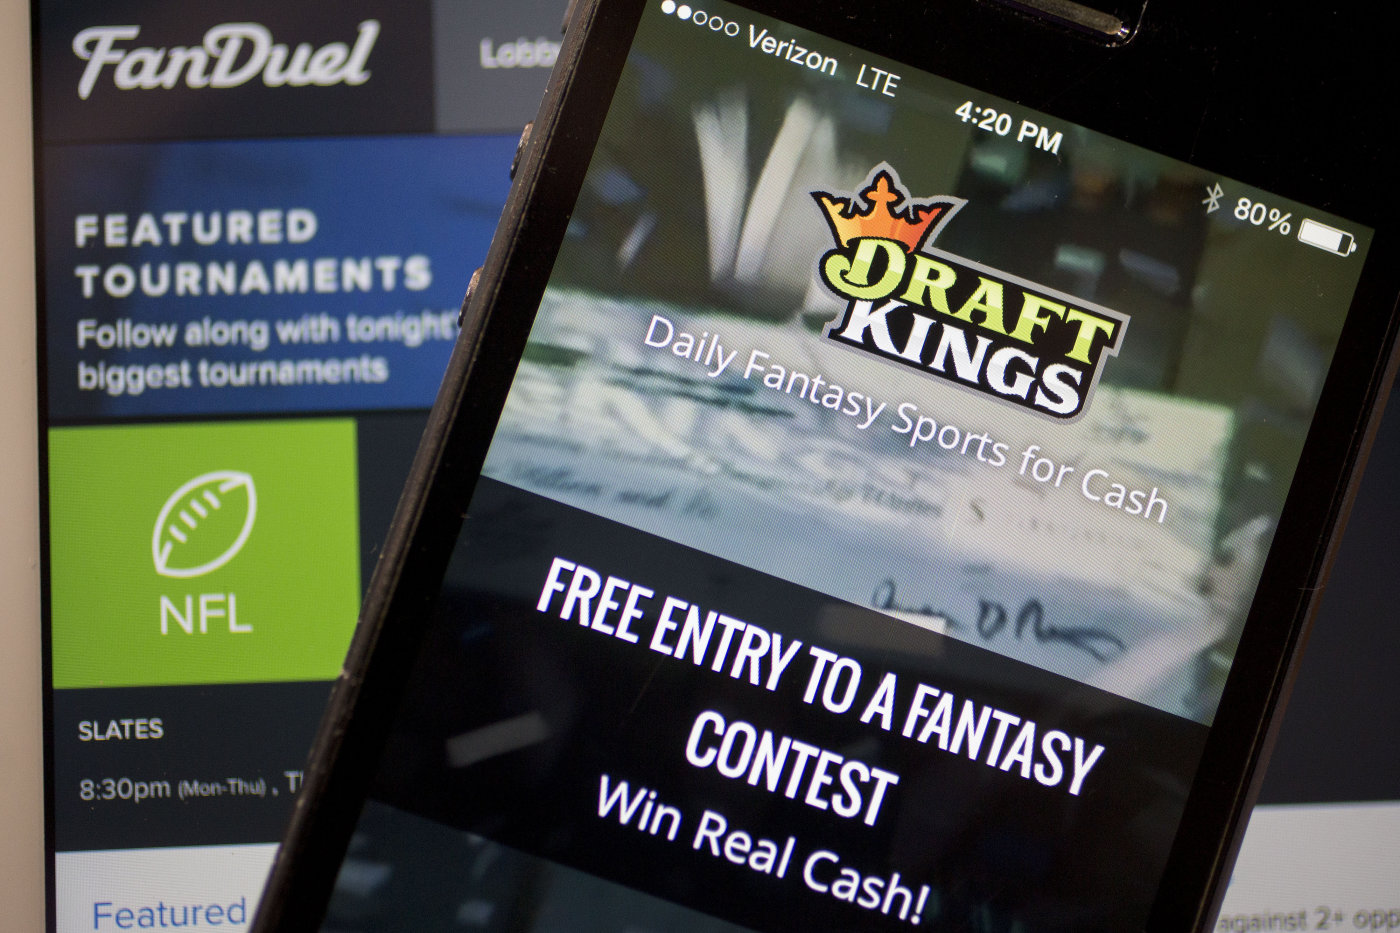 DraftKings and FanDuel pull the plug on college fantasy contests